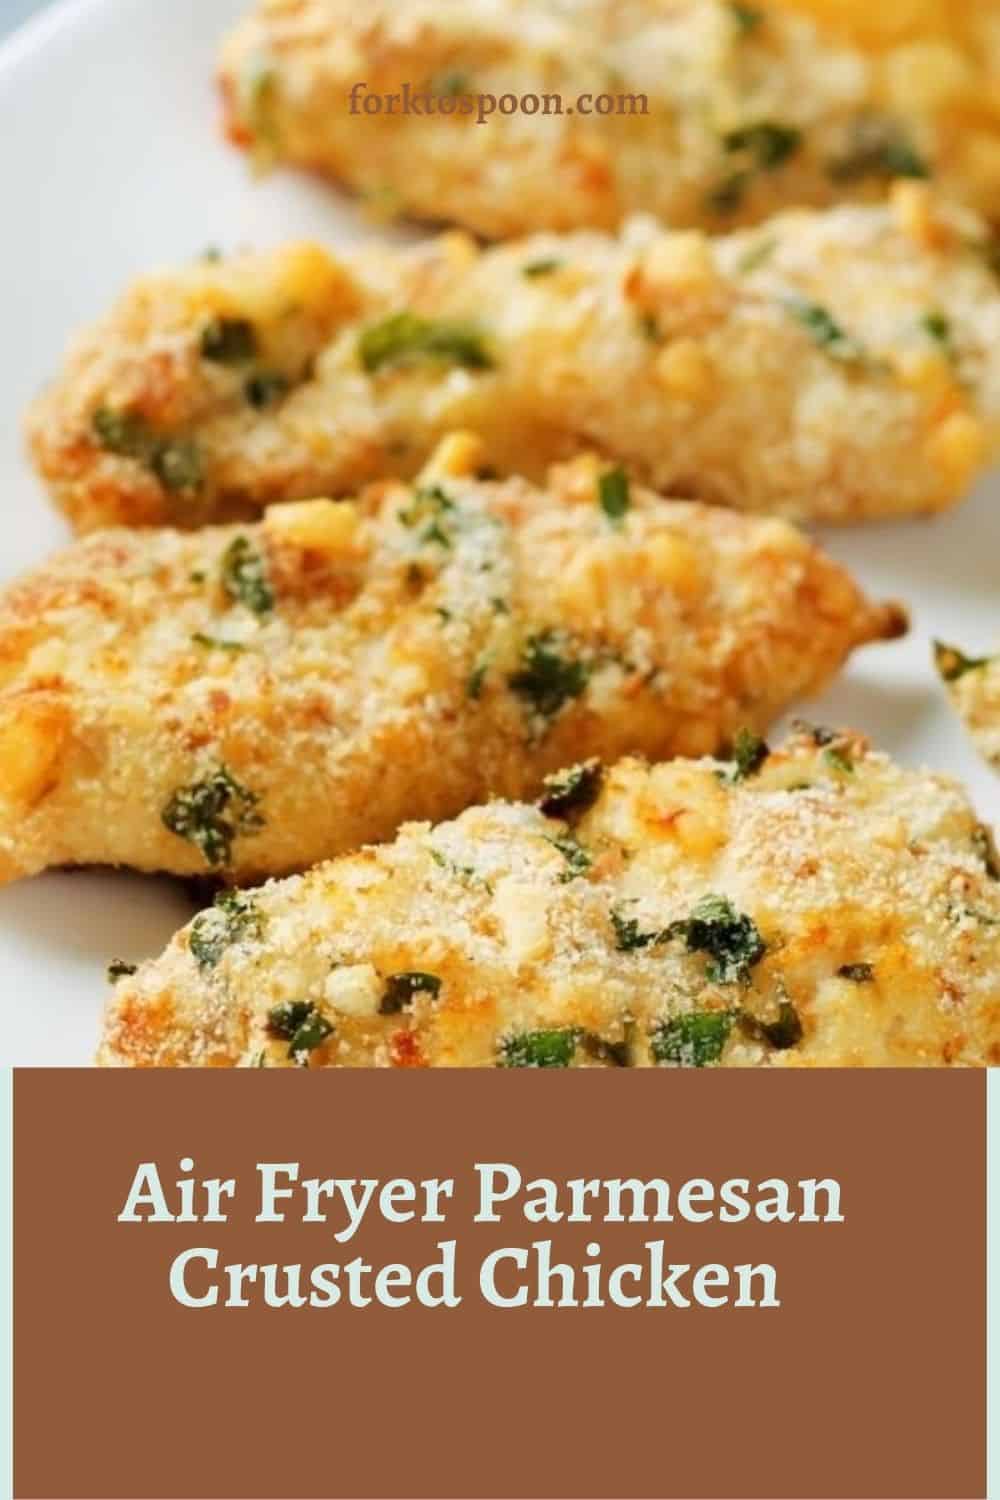 Air Fryer Parmesan Crusted Chicken - Fork To Spoon